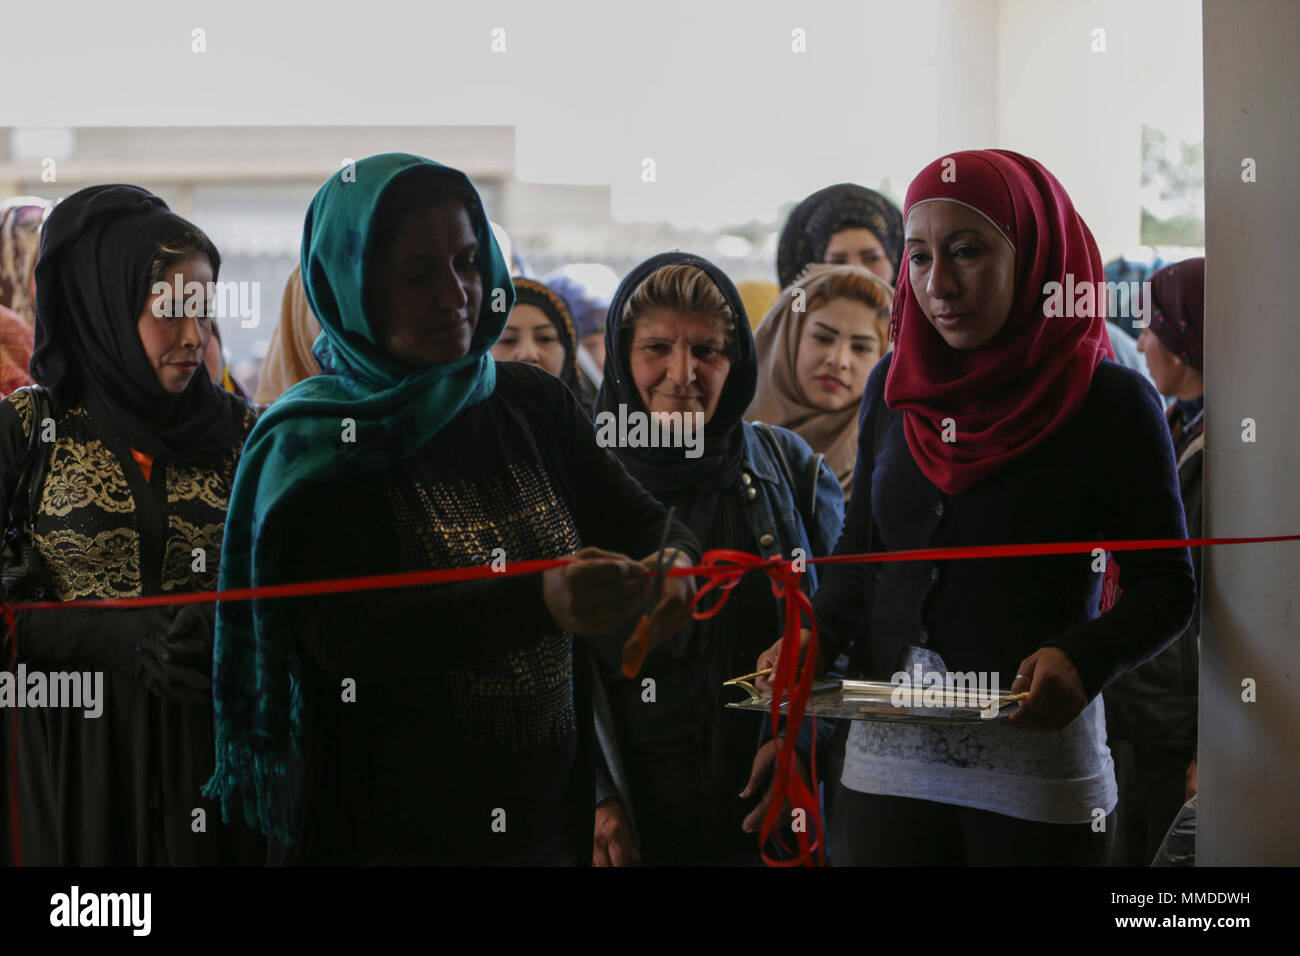 Raqqah Civil Council’s women’s committee co-president, Fairuz, cuts the ribbon declaring the opening of the new women’s center in Khatuniyah, Syria, March 26, 2018. Coalition Forces are supporting the Raqqah Civil Council’s objective to restore critical infrastructure and services in Raqqah and the surrounding area.  (U.S. Army Stock Photo